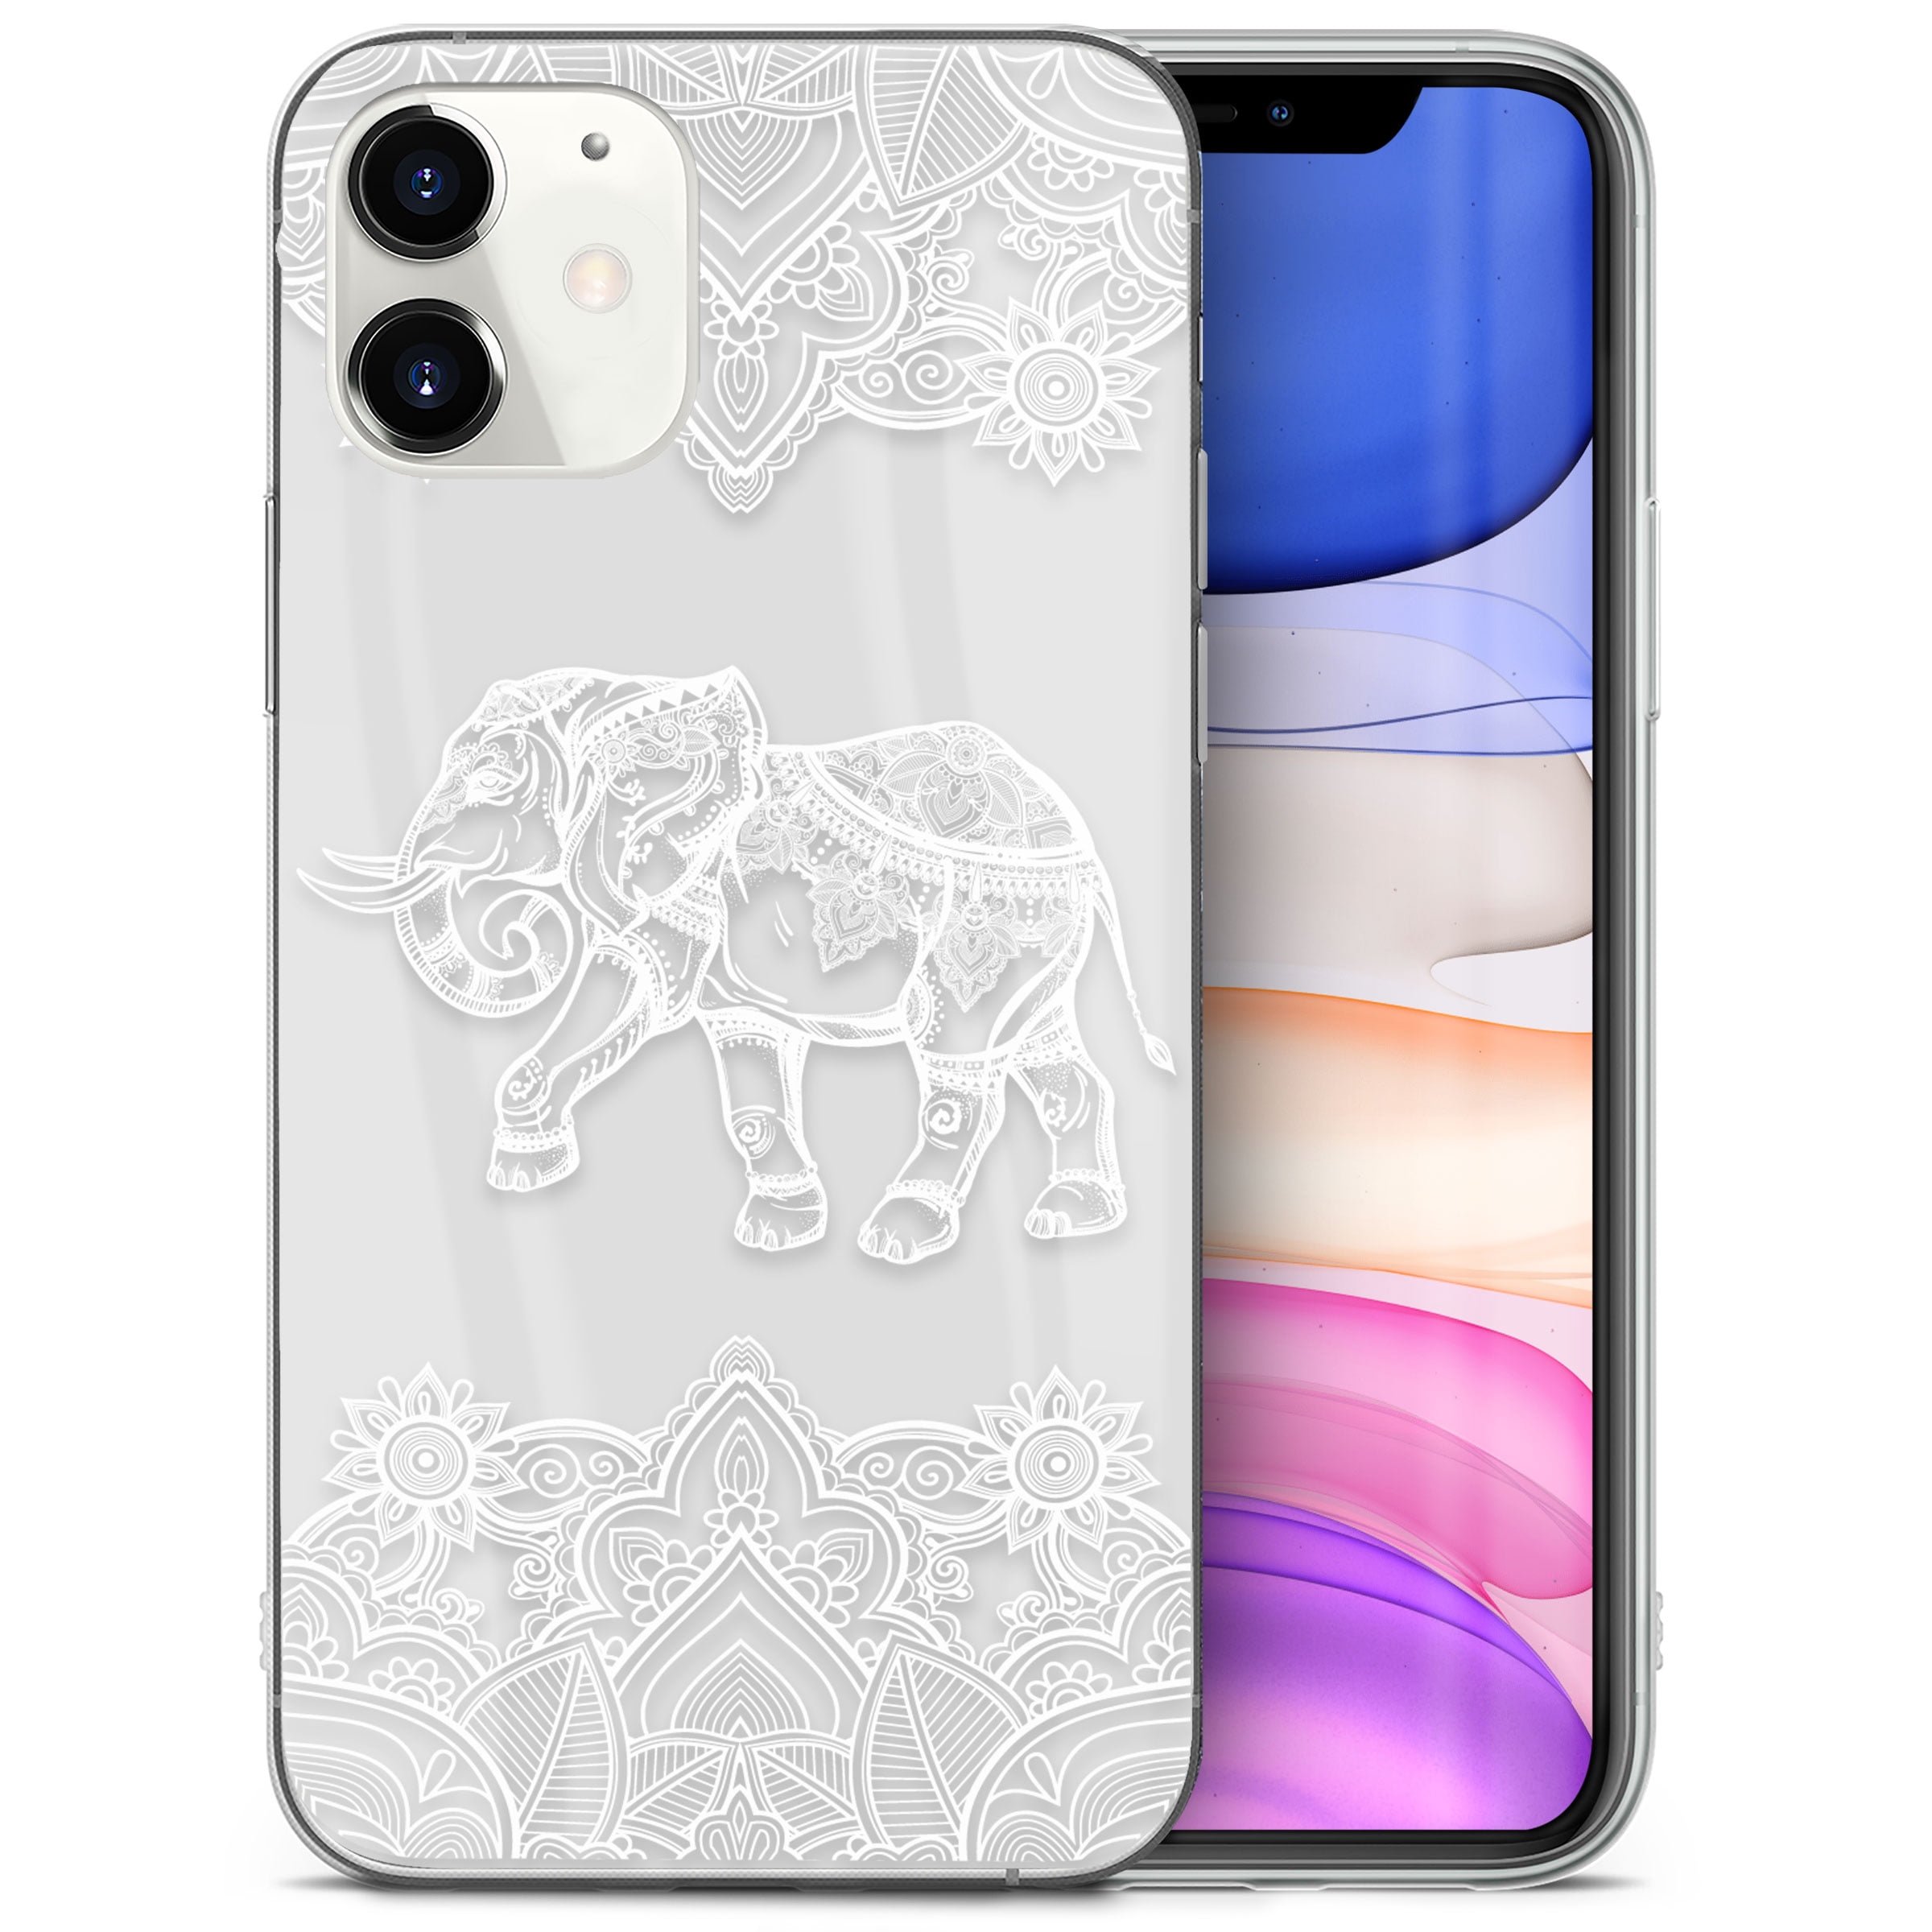 Case Yard iPhone-X Case Clear Soft & Flexible TPU Ultra Low Profile Slim  Fit Thin Shockproof Transparent Bumper Protective Cover Drop Protective  Cell Phone Cases (Royal Elephant Mandala) 